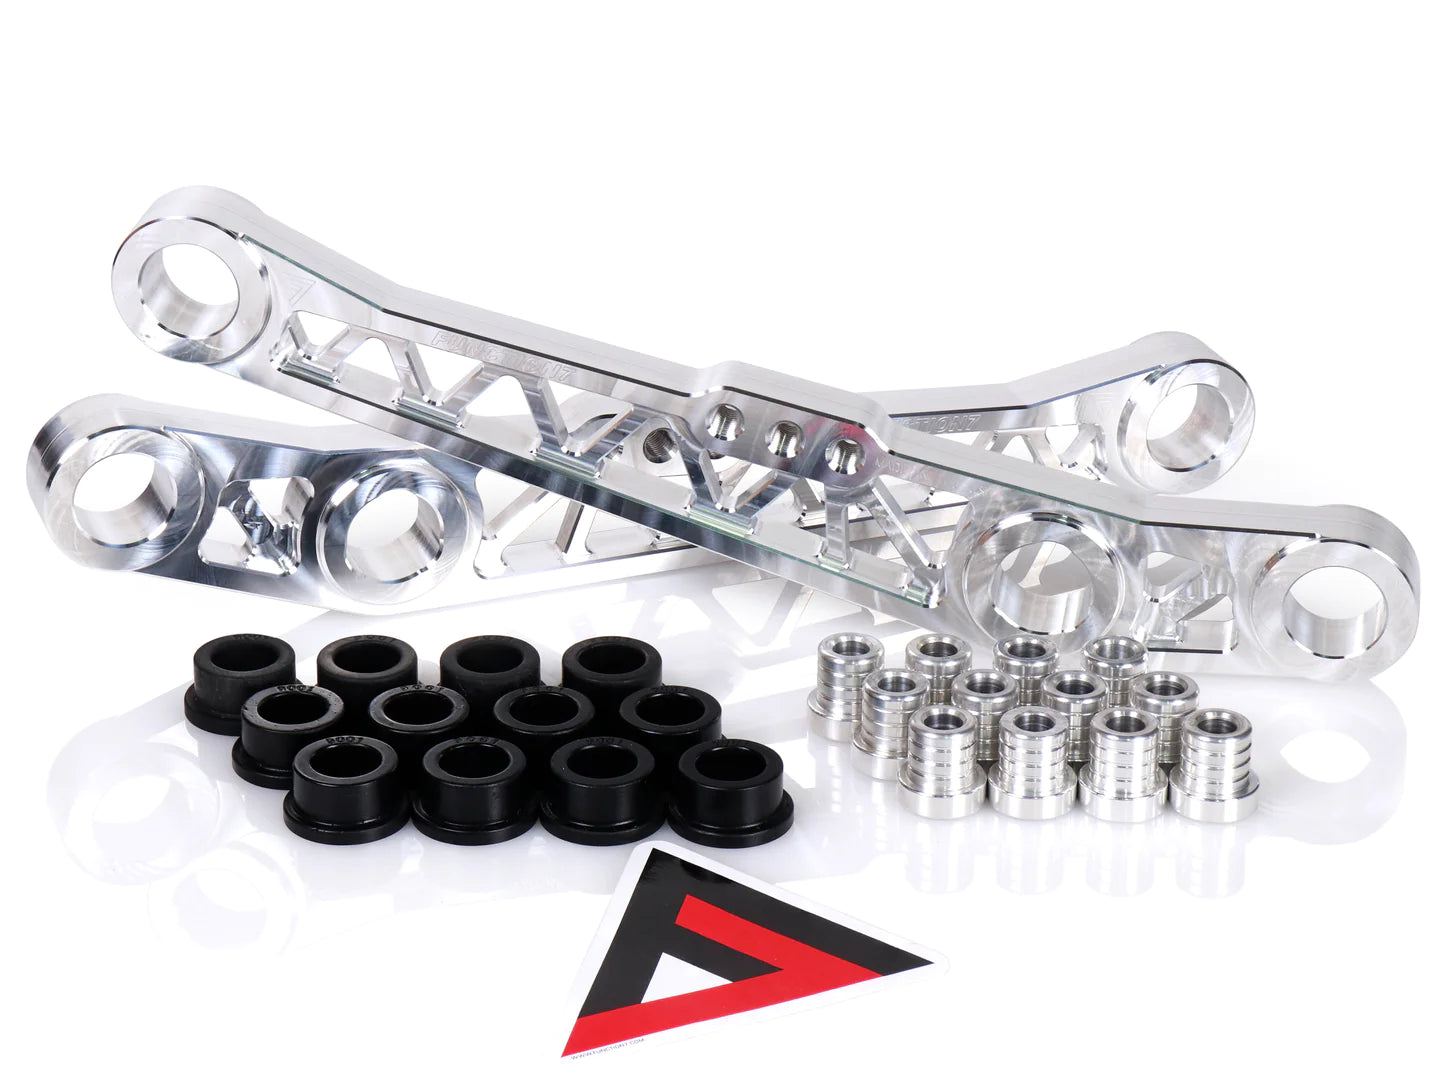 Function7 Rear Lower Control Arms - 90-01 Integra / 88-95 Civic